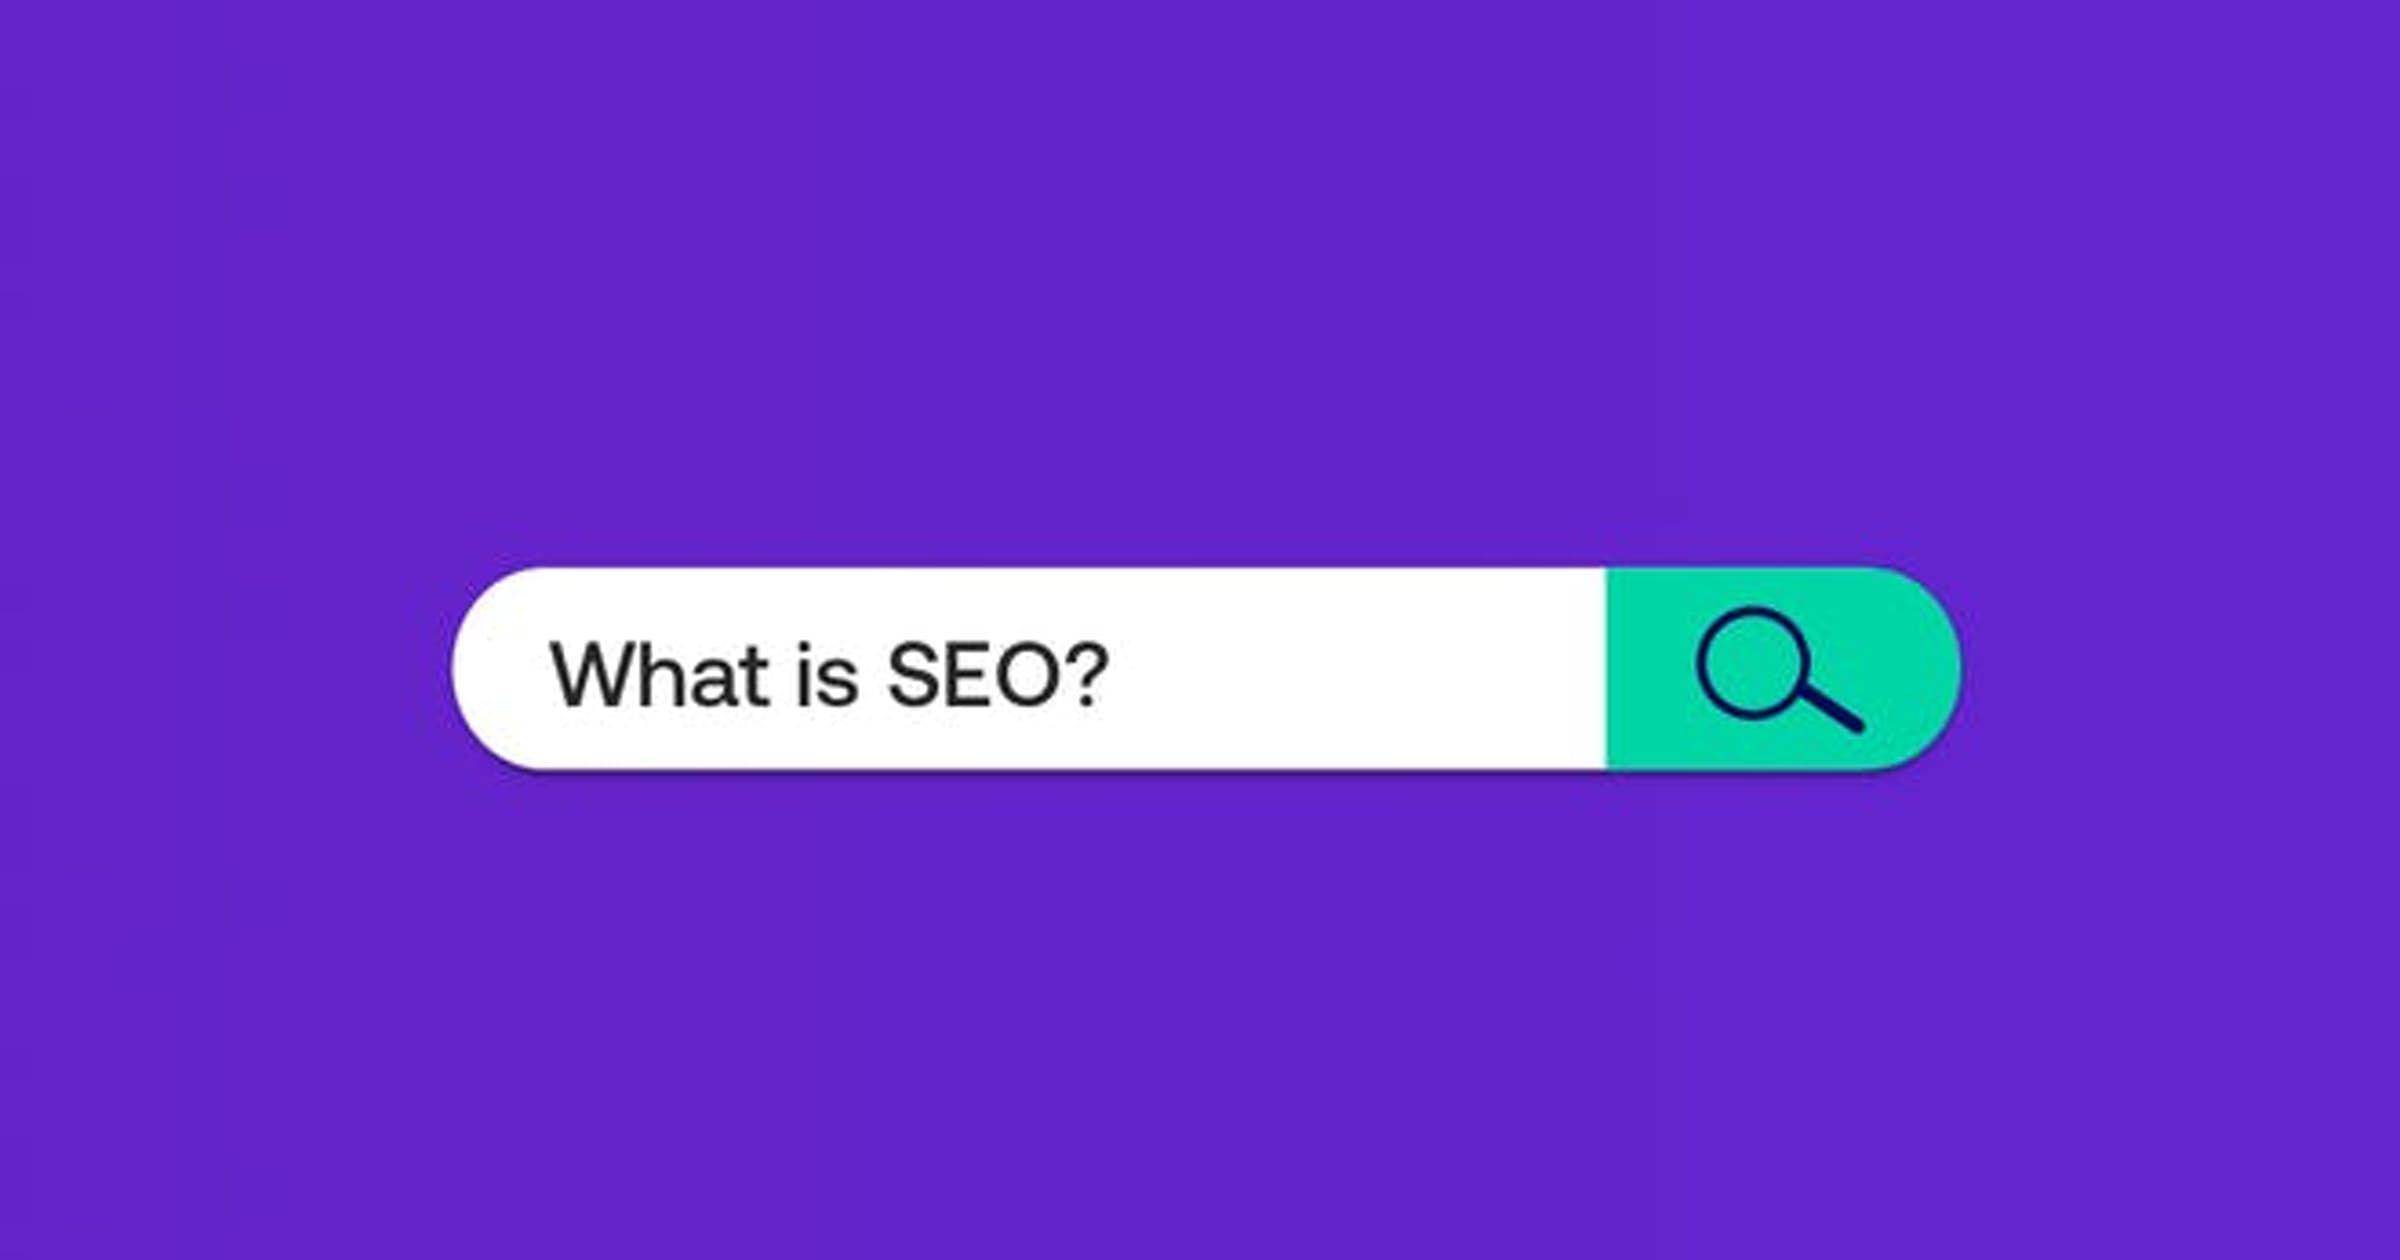 What is SEO in a search bar